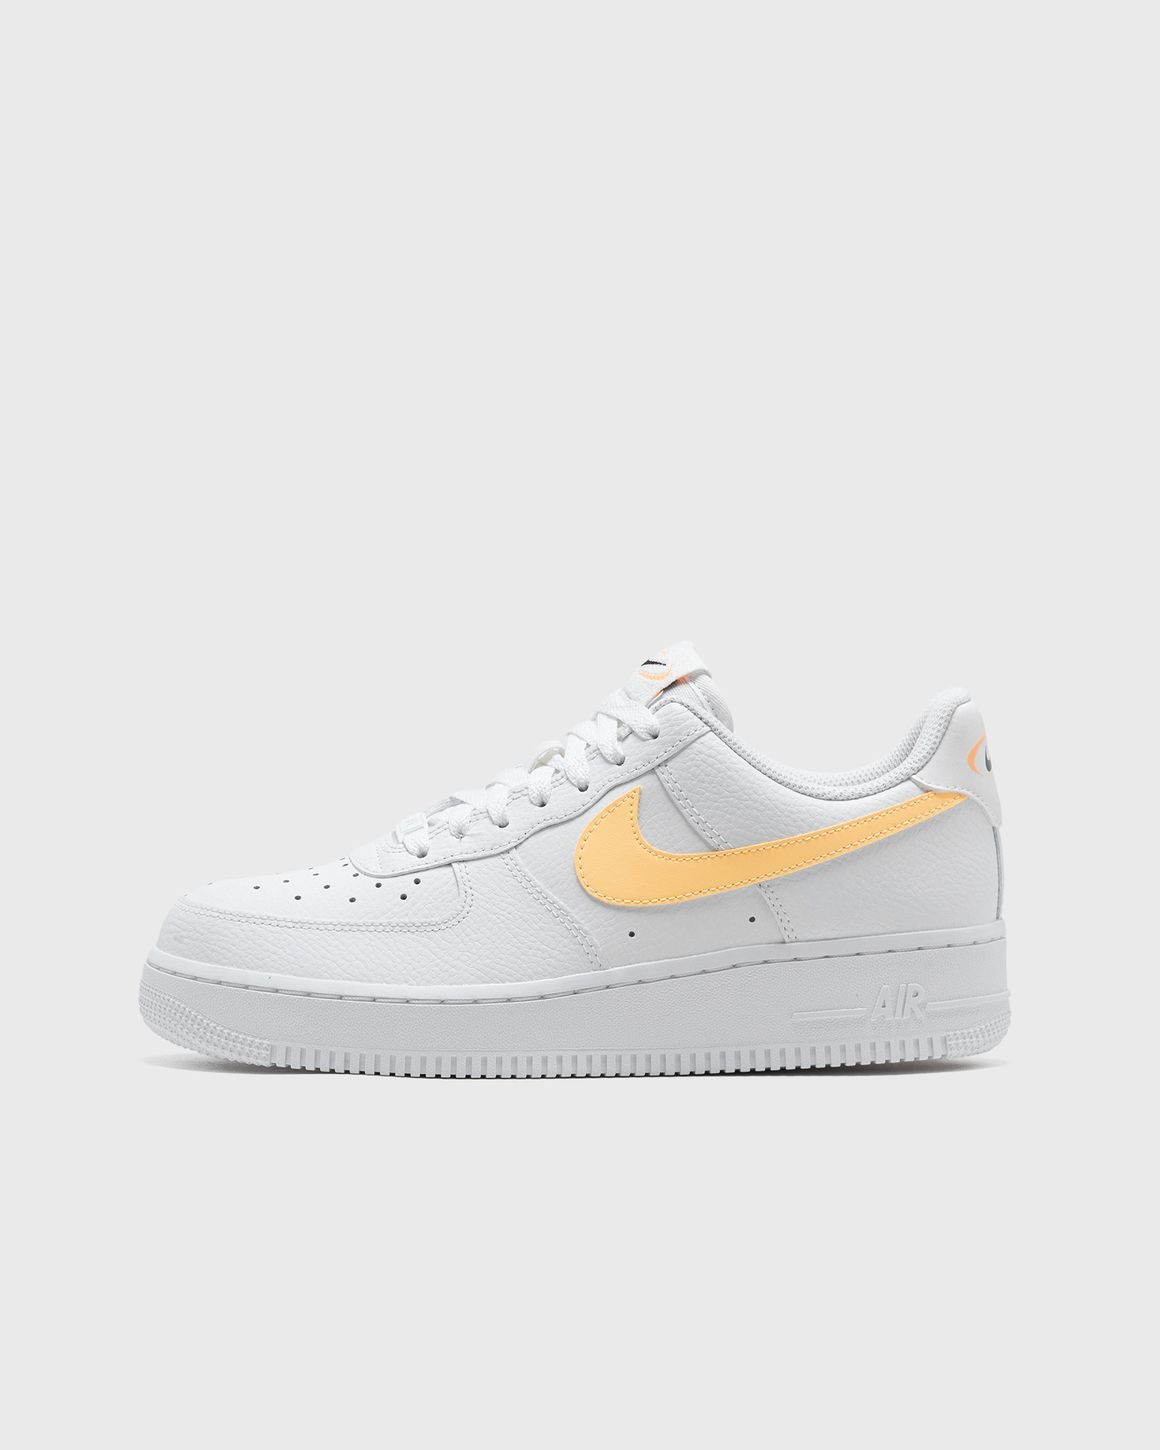 WMNS NIKE AIR FORCE 1 '07 - 1